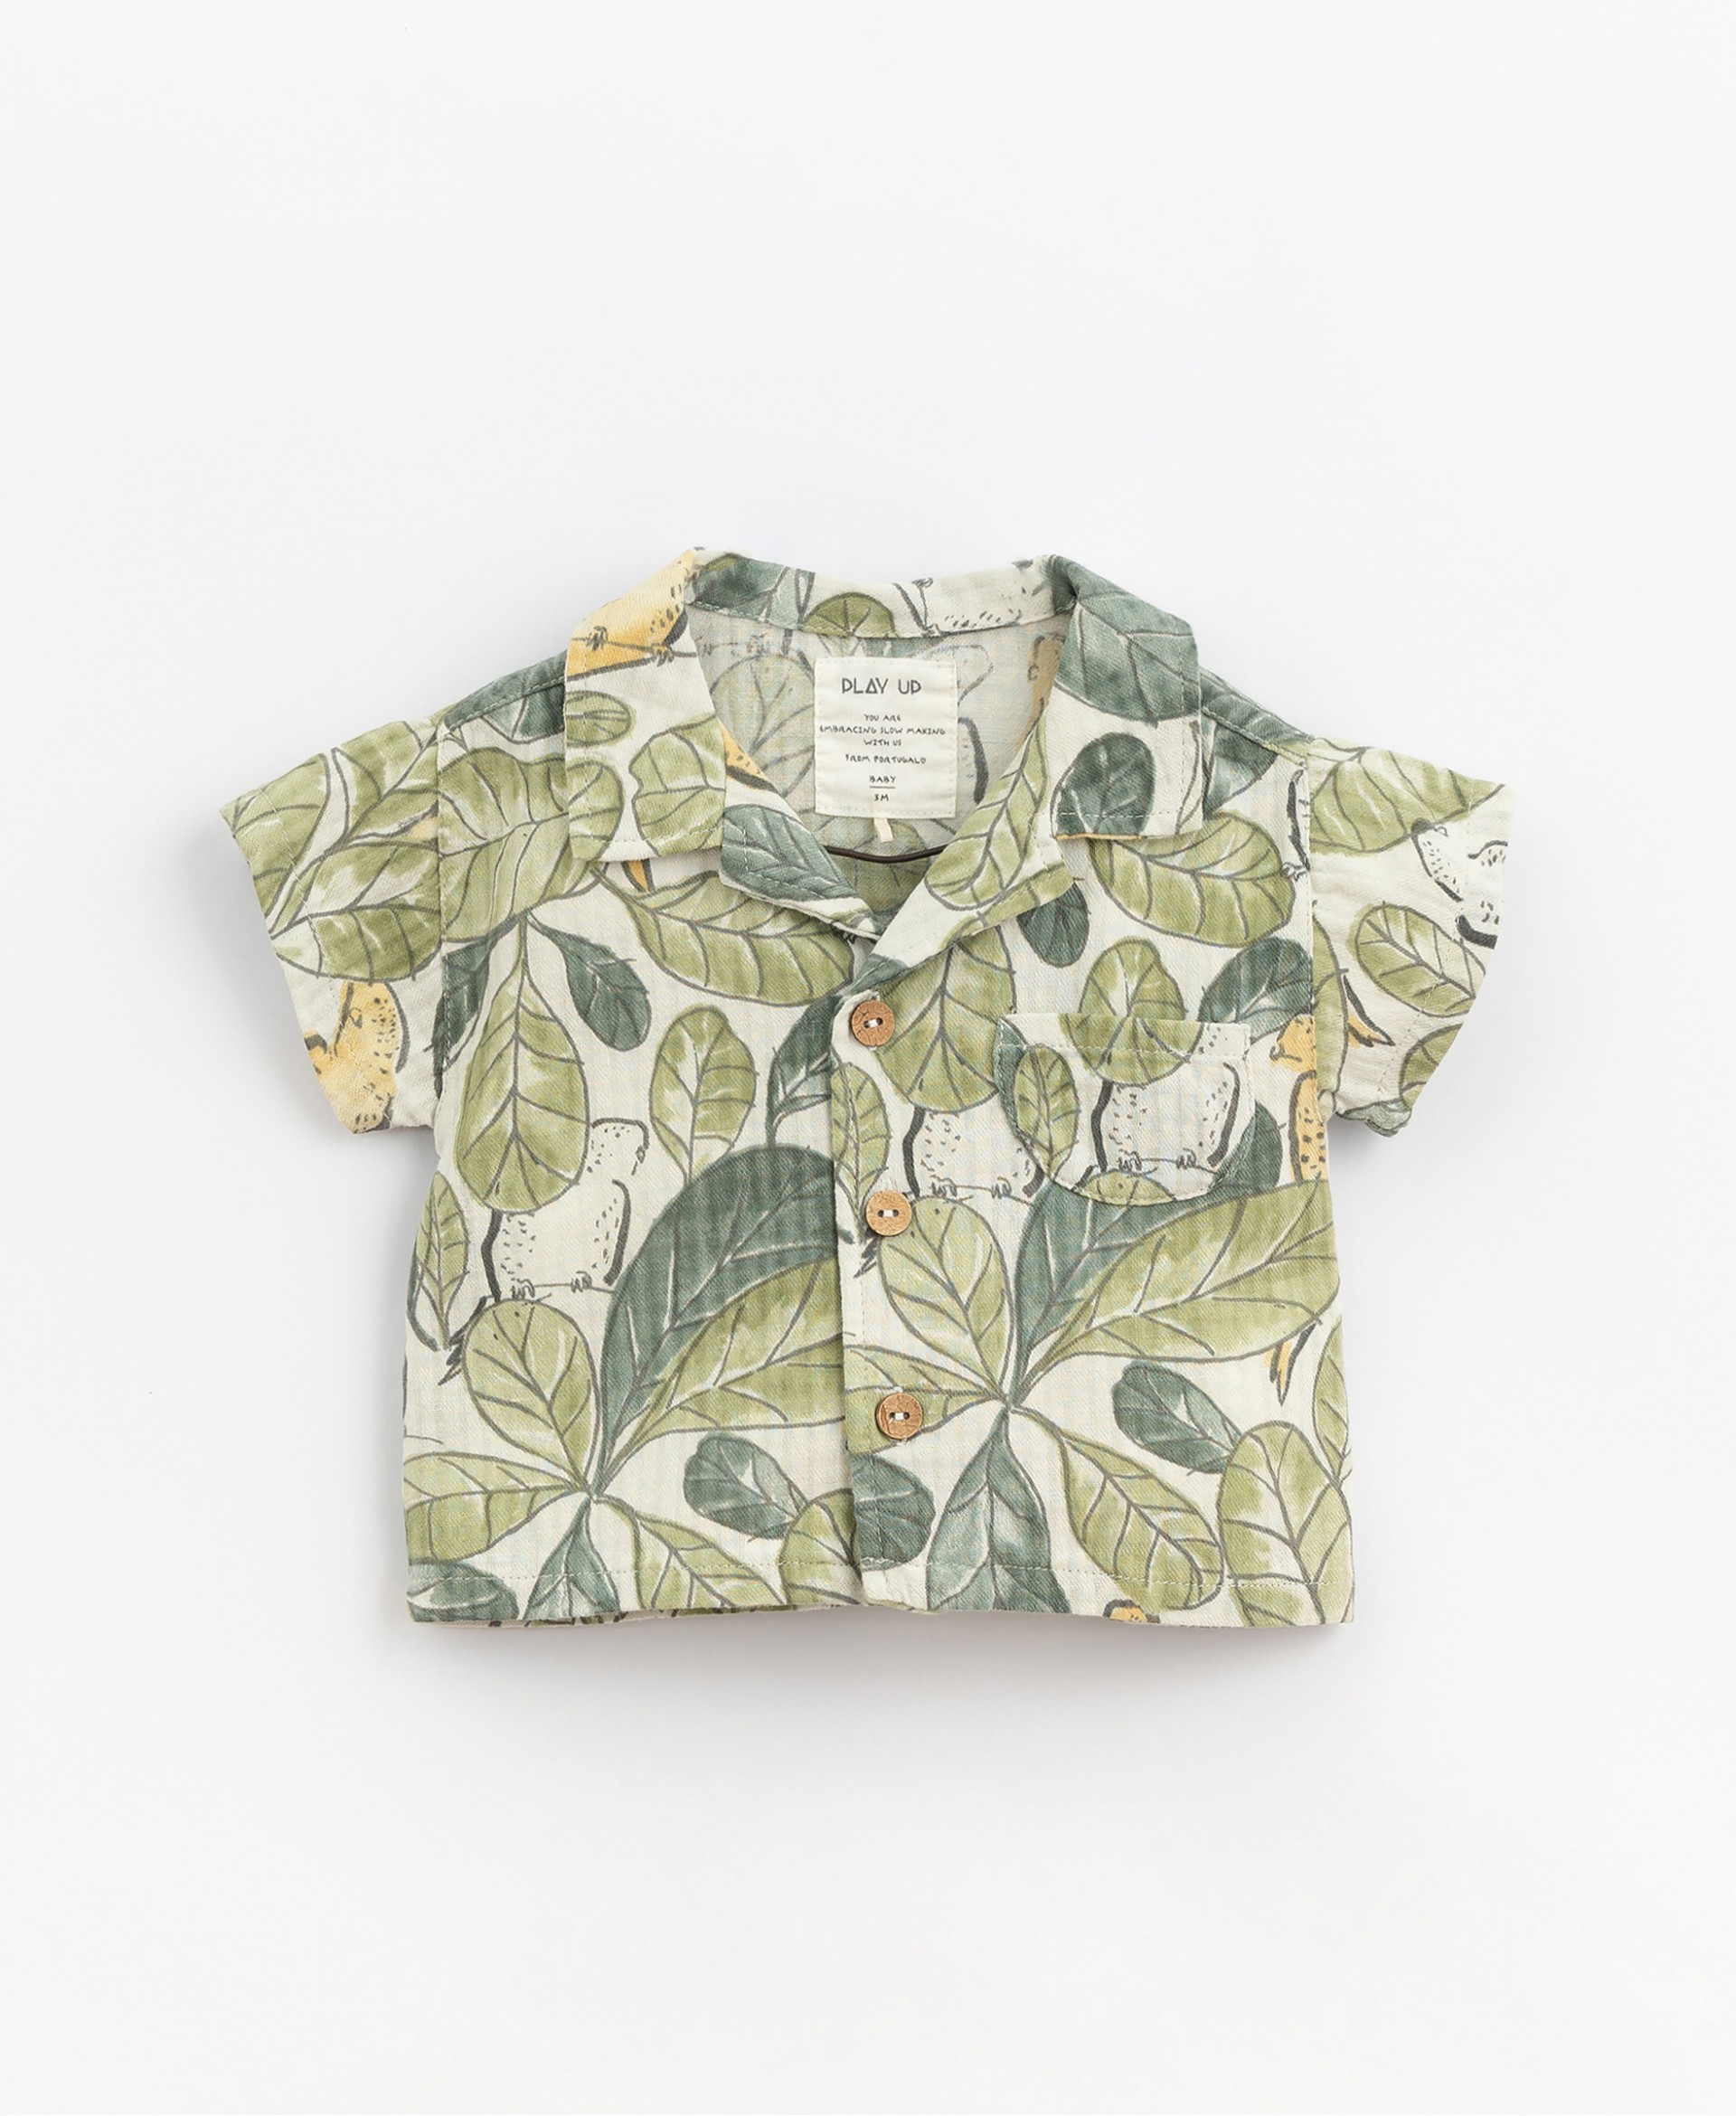 Cotton shirt with breast pocket | Basketry